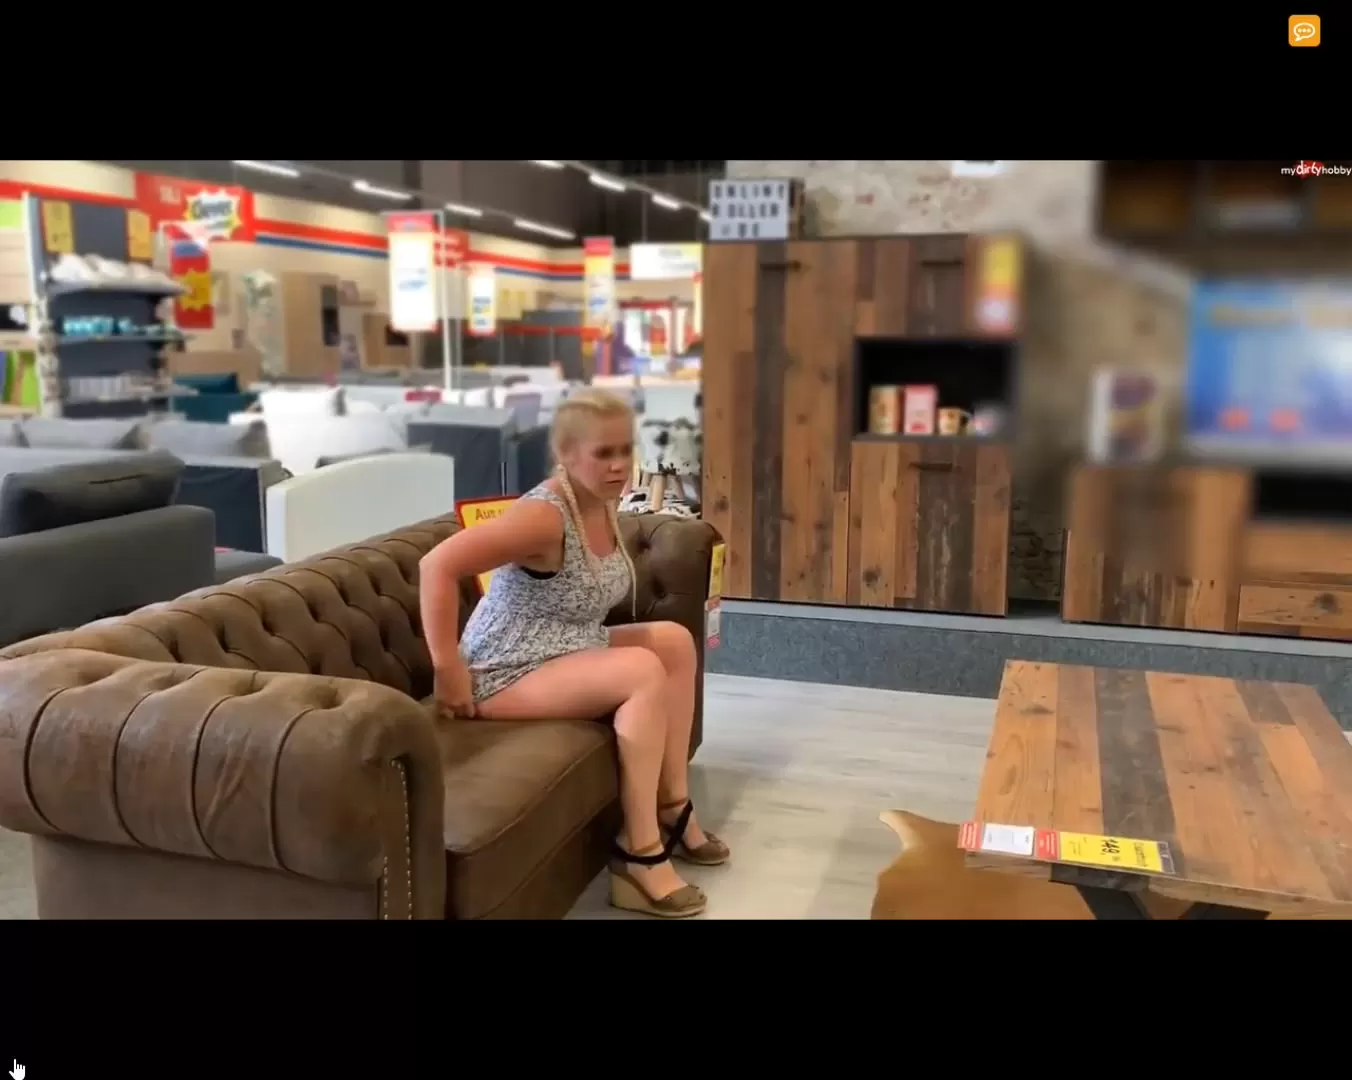 Woman pissing on a couch in furniture market pic